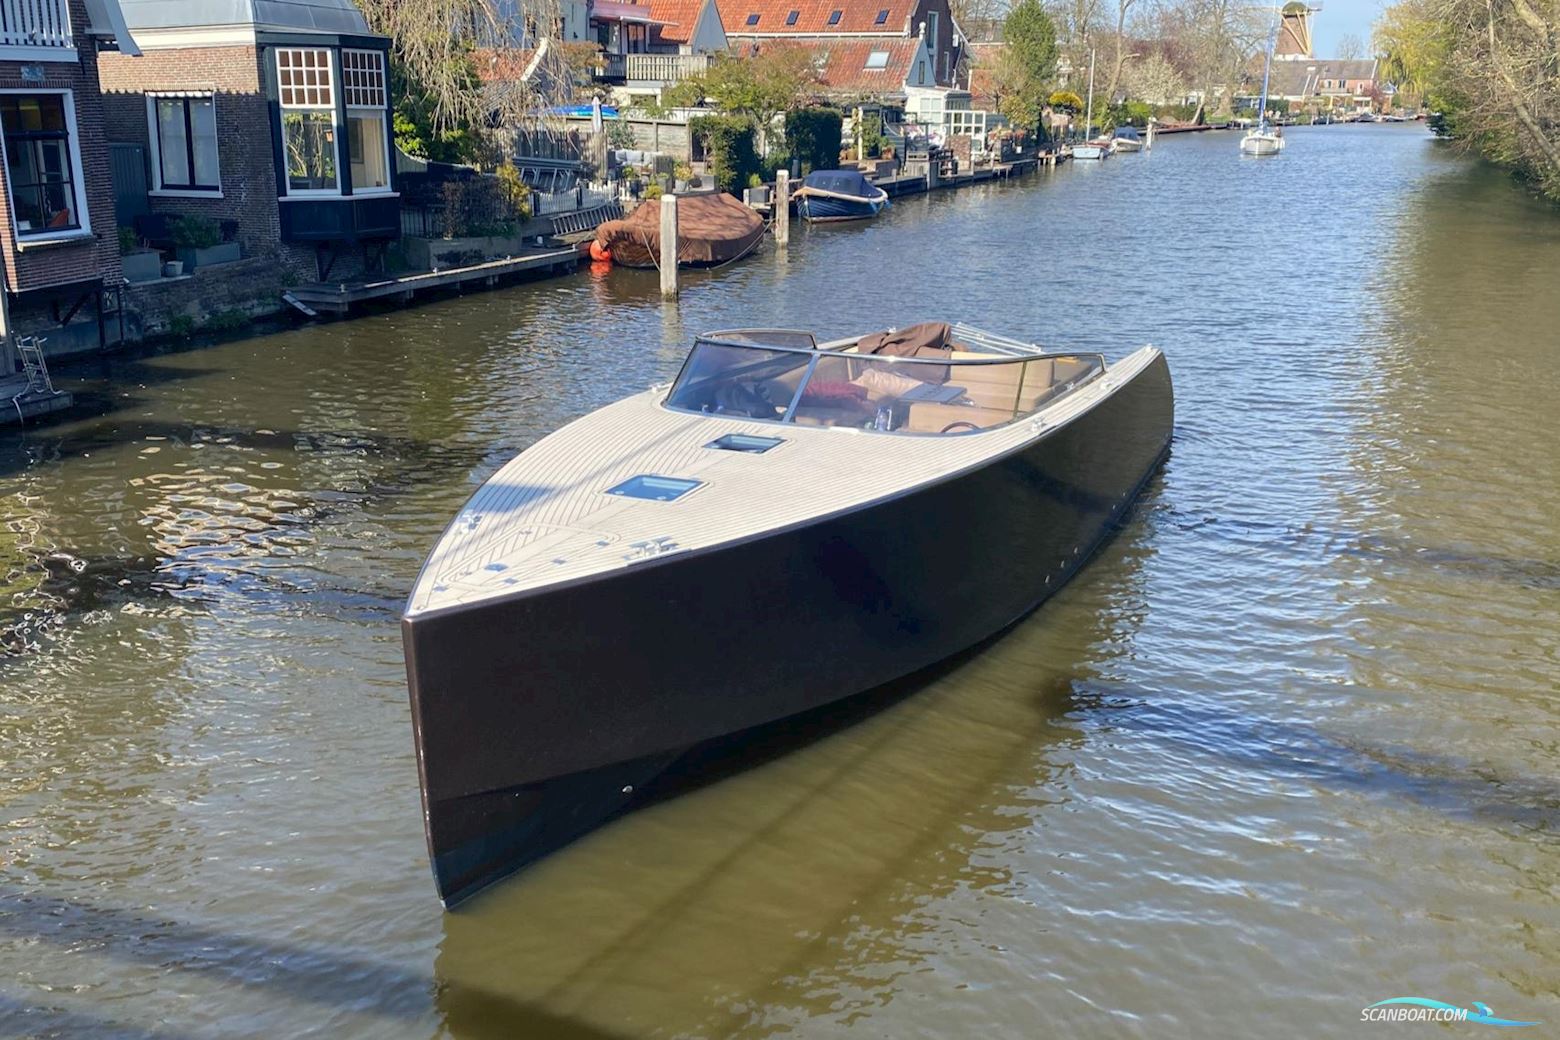 Vandutch 40 Motor boat 2009, with 2x Yanmar BY 260 engine, The Netherlands